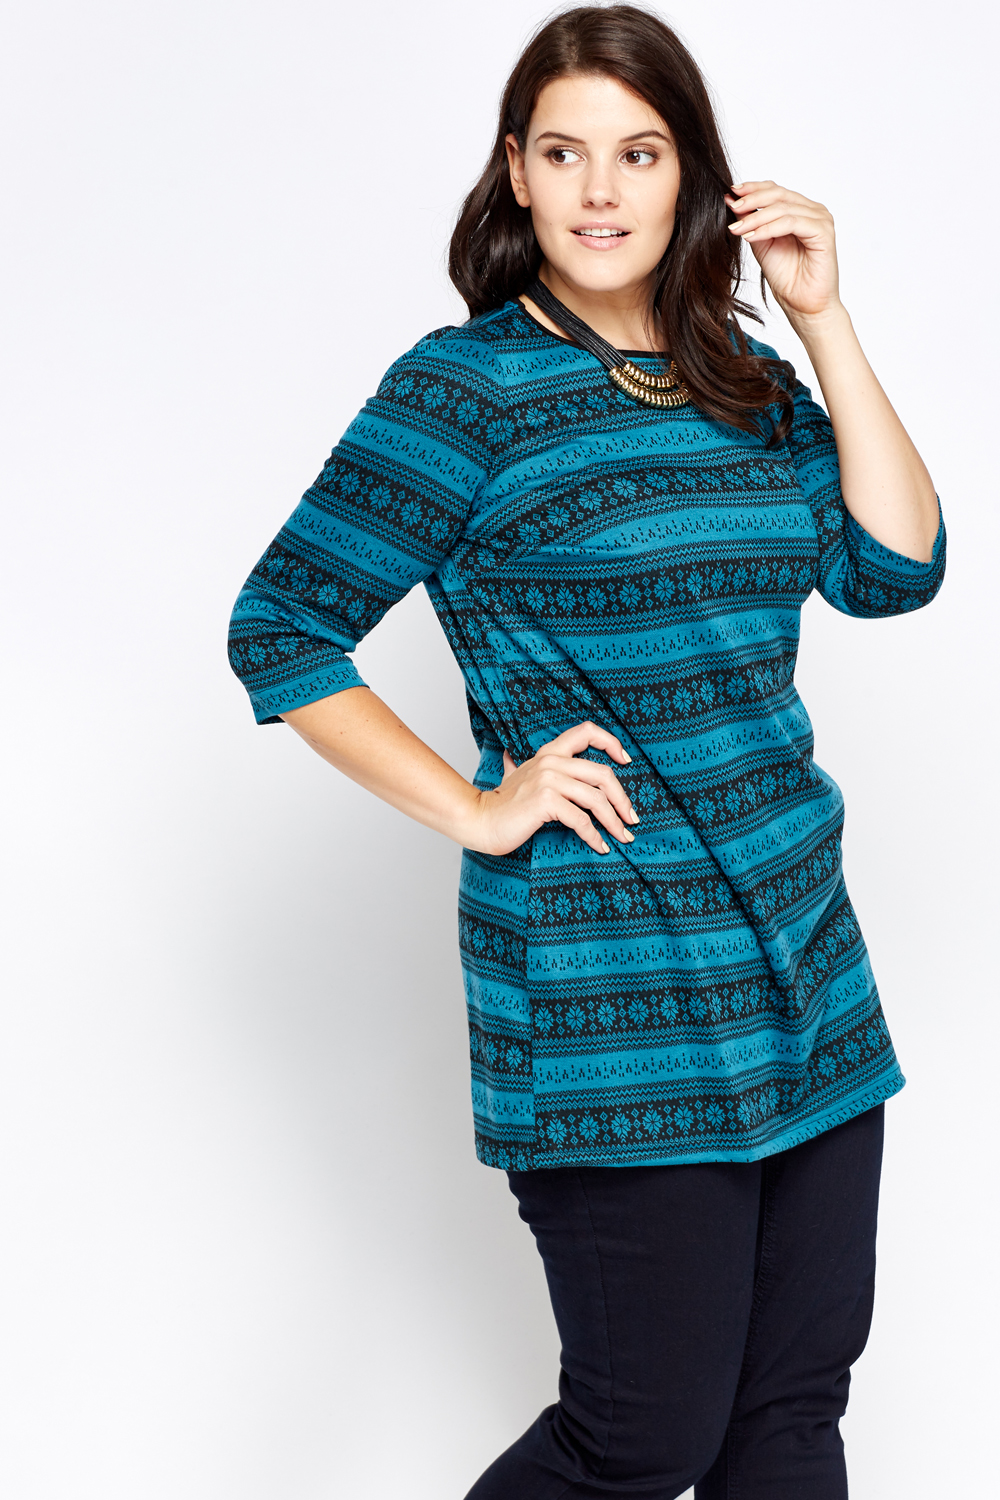 Teal Printed Tunic Top - Just $7